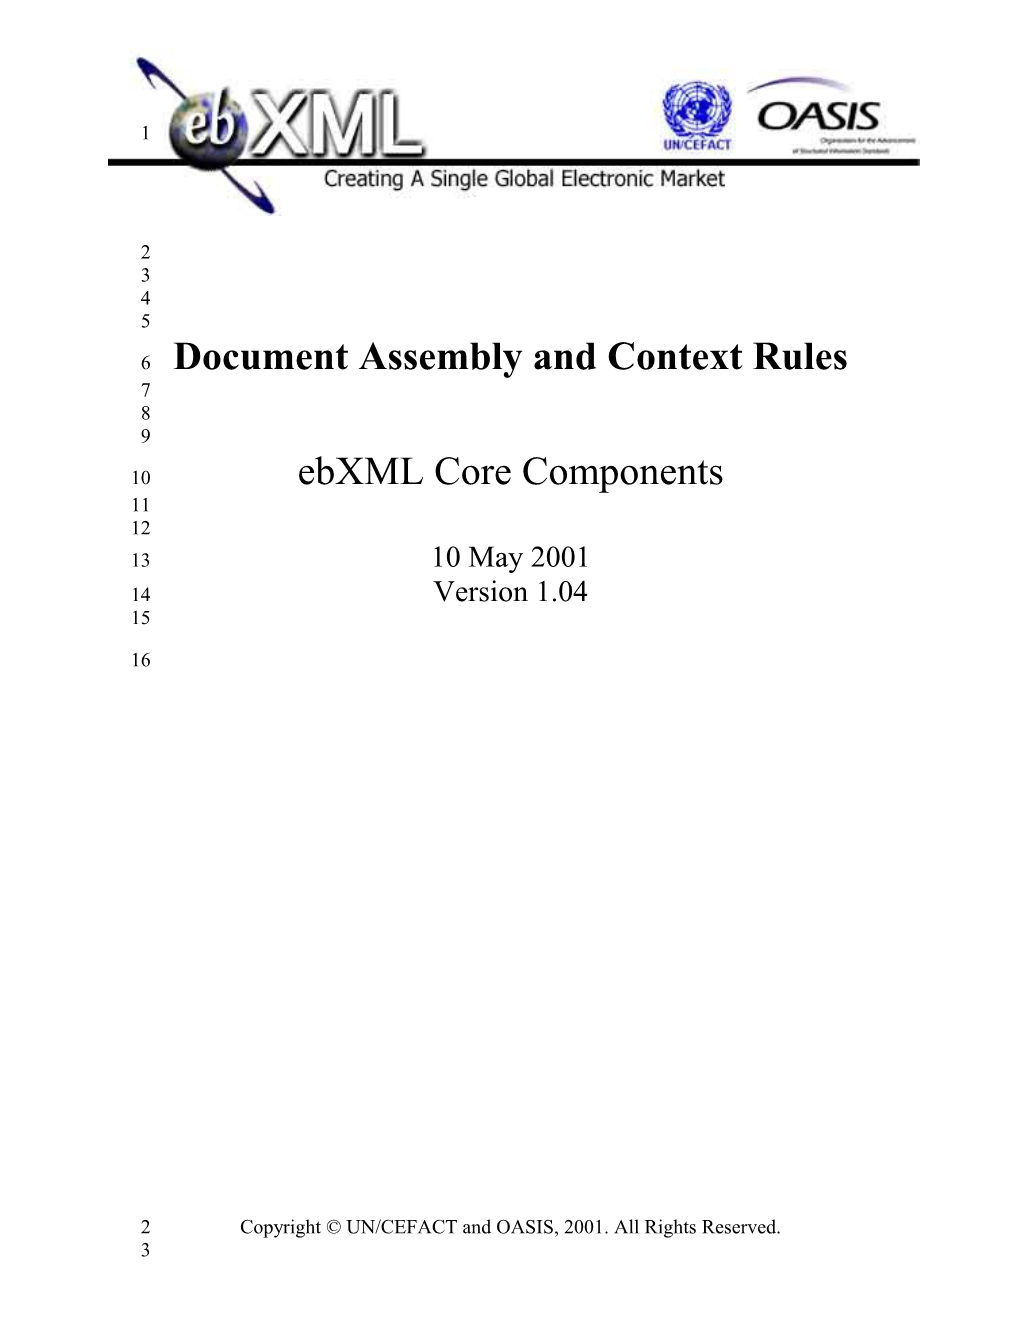 Ebxml White Paper - Document Assembly and Context Rules